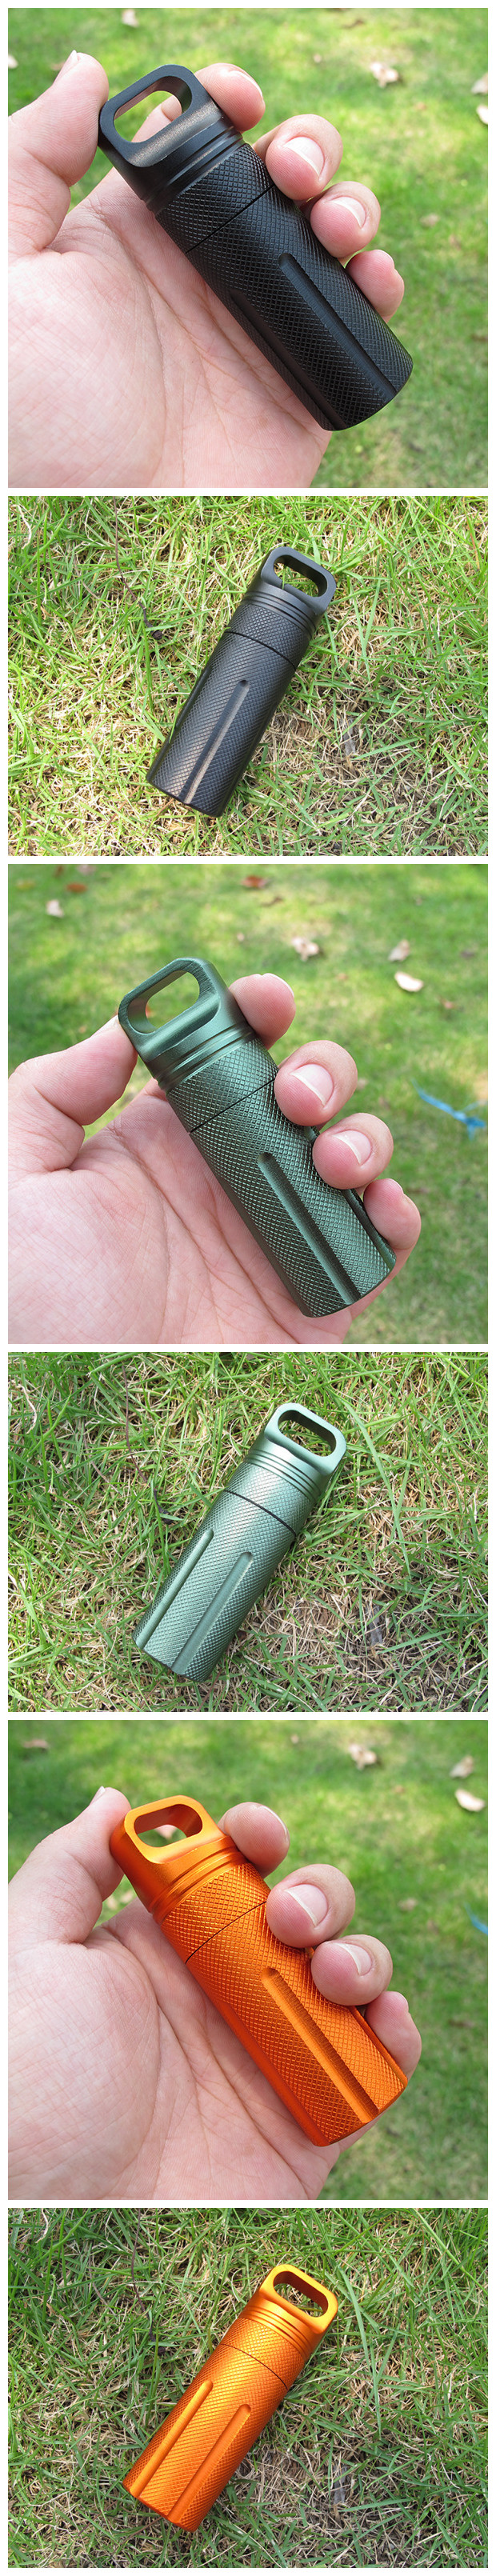 IPReetrade-Outdoor-CNC-Waterproof-Pill-Storage-Case-EDC-Seal-Canister-Survival-Emergency-Container-1080188-6